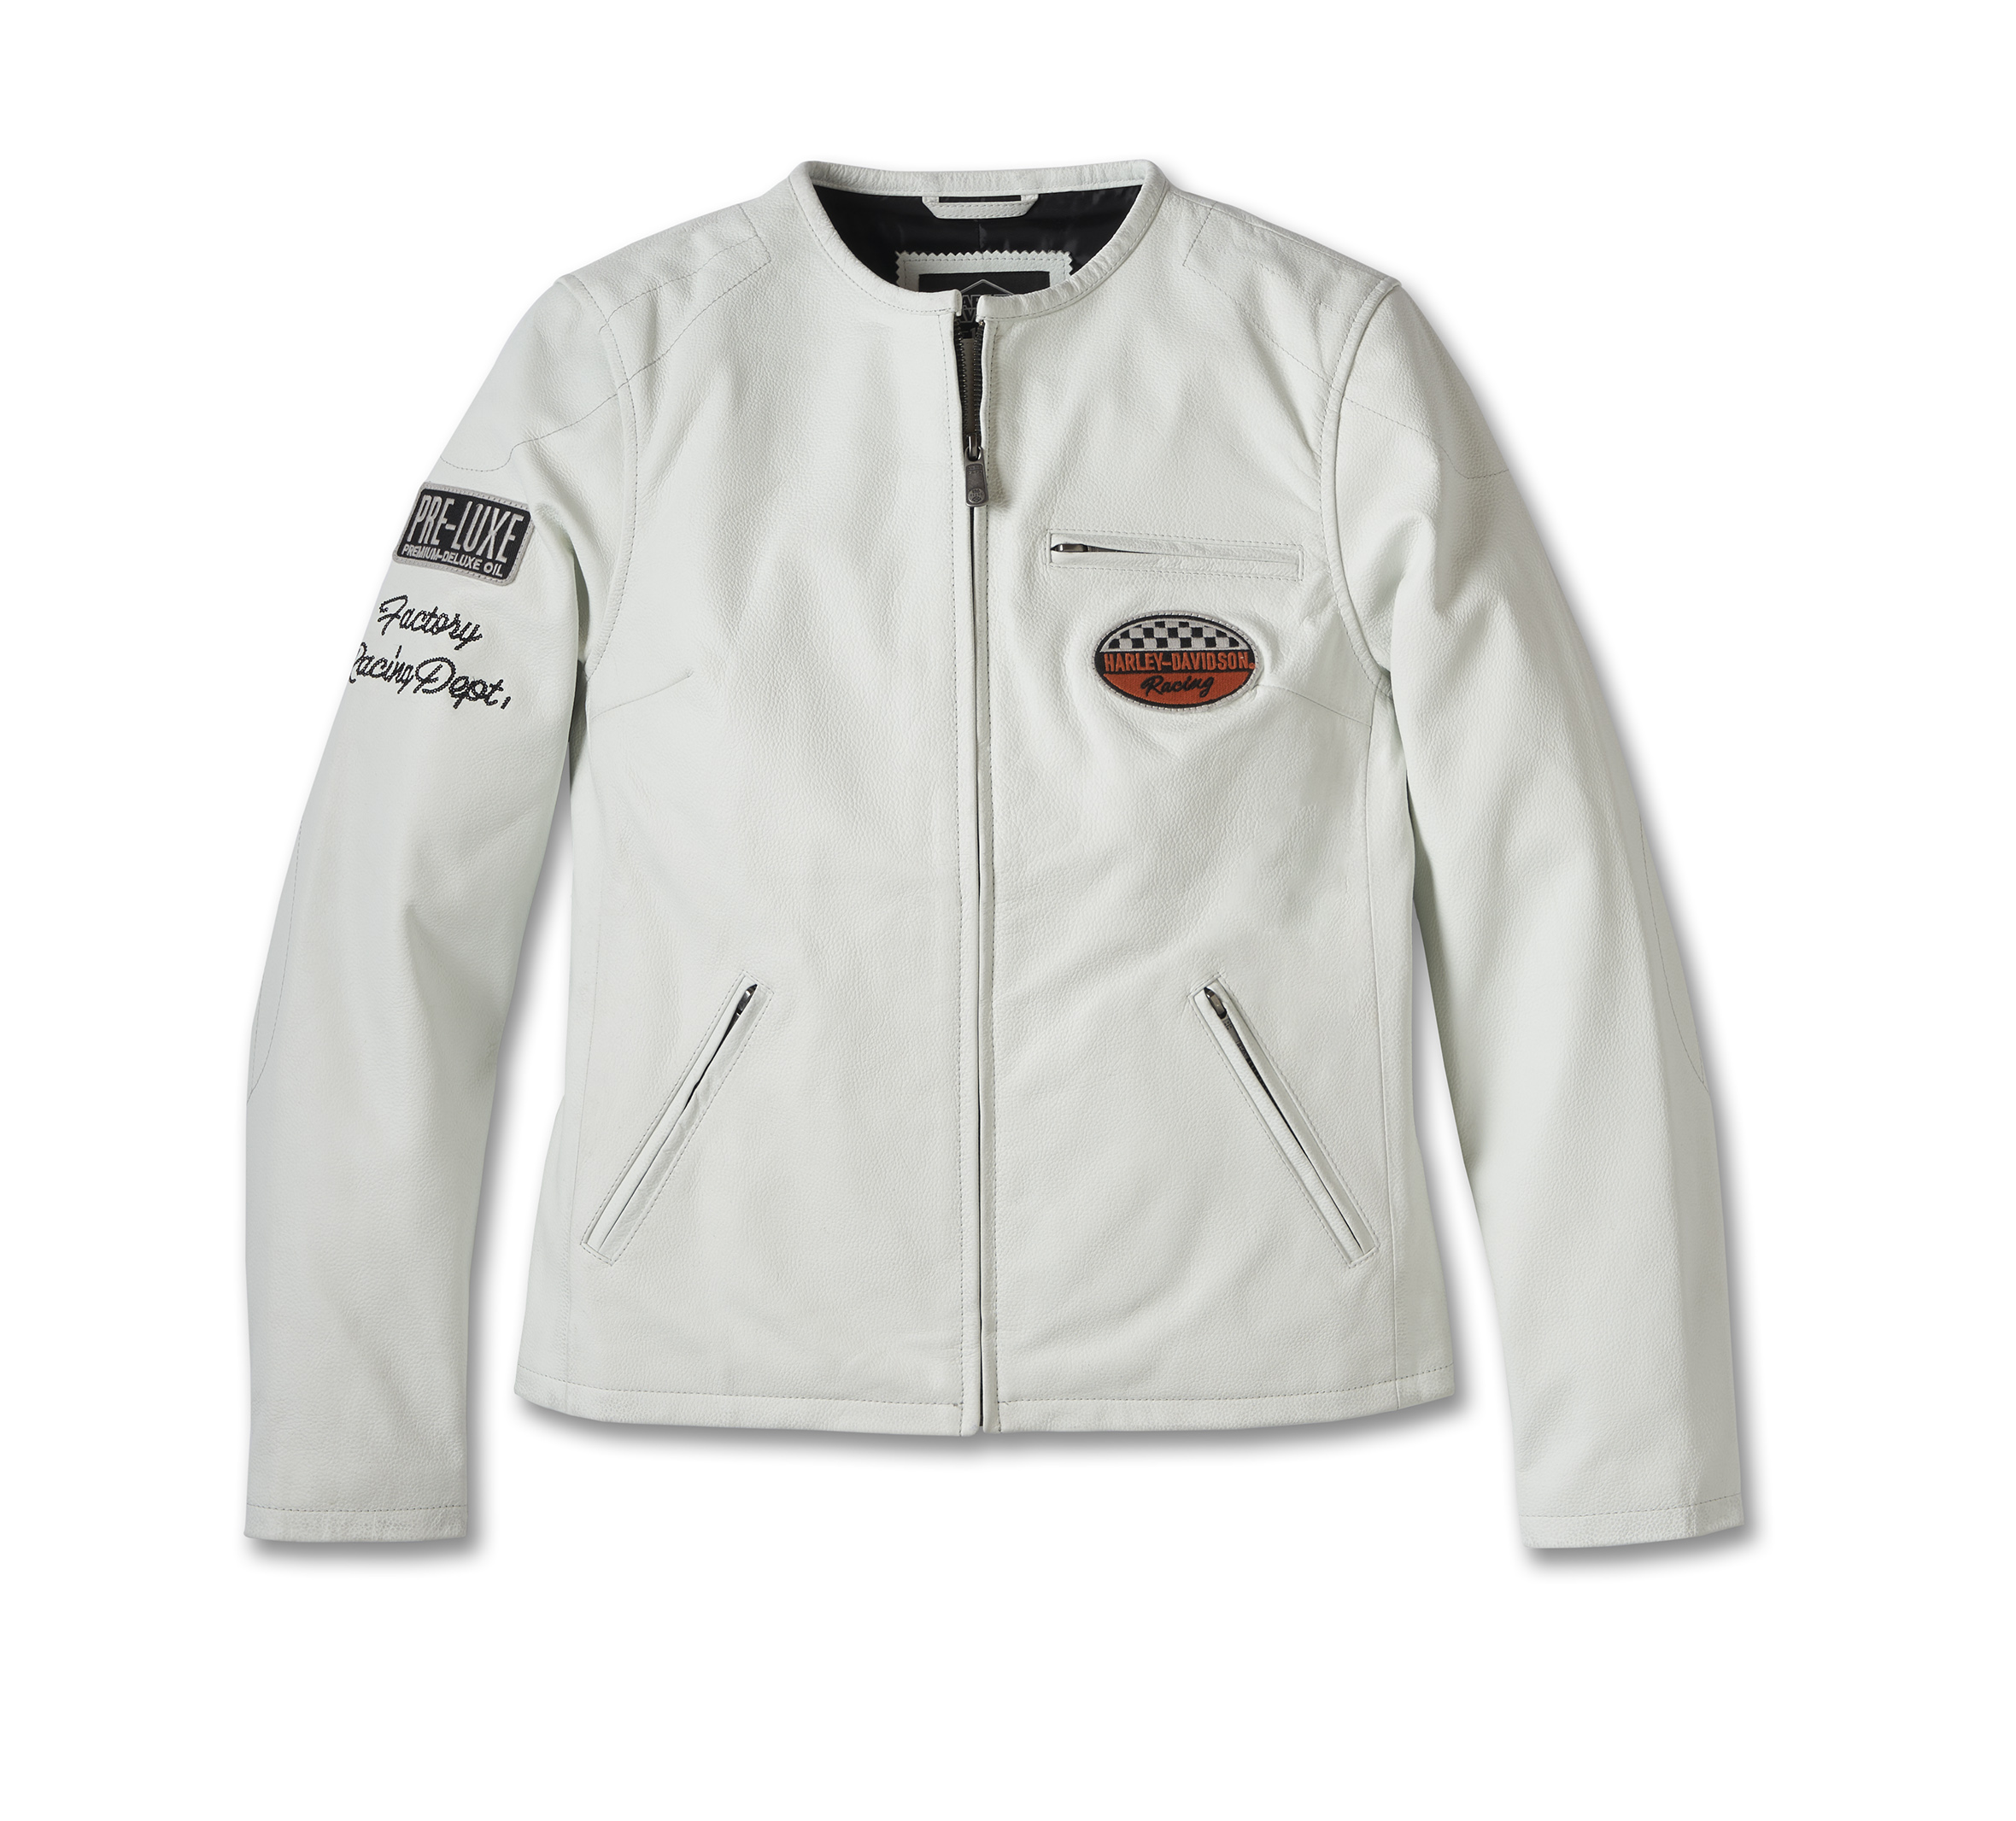 Women's 120th Anniversary Cafe Racer Leather Jacket - Bright White